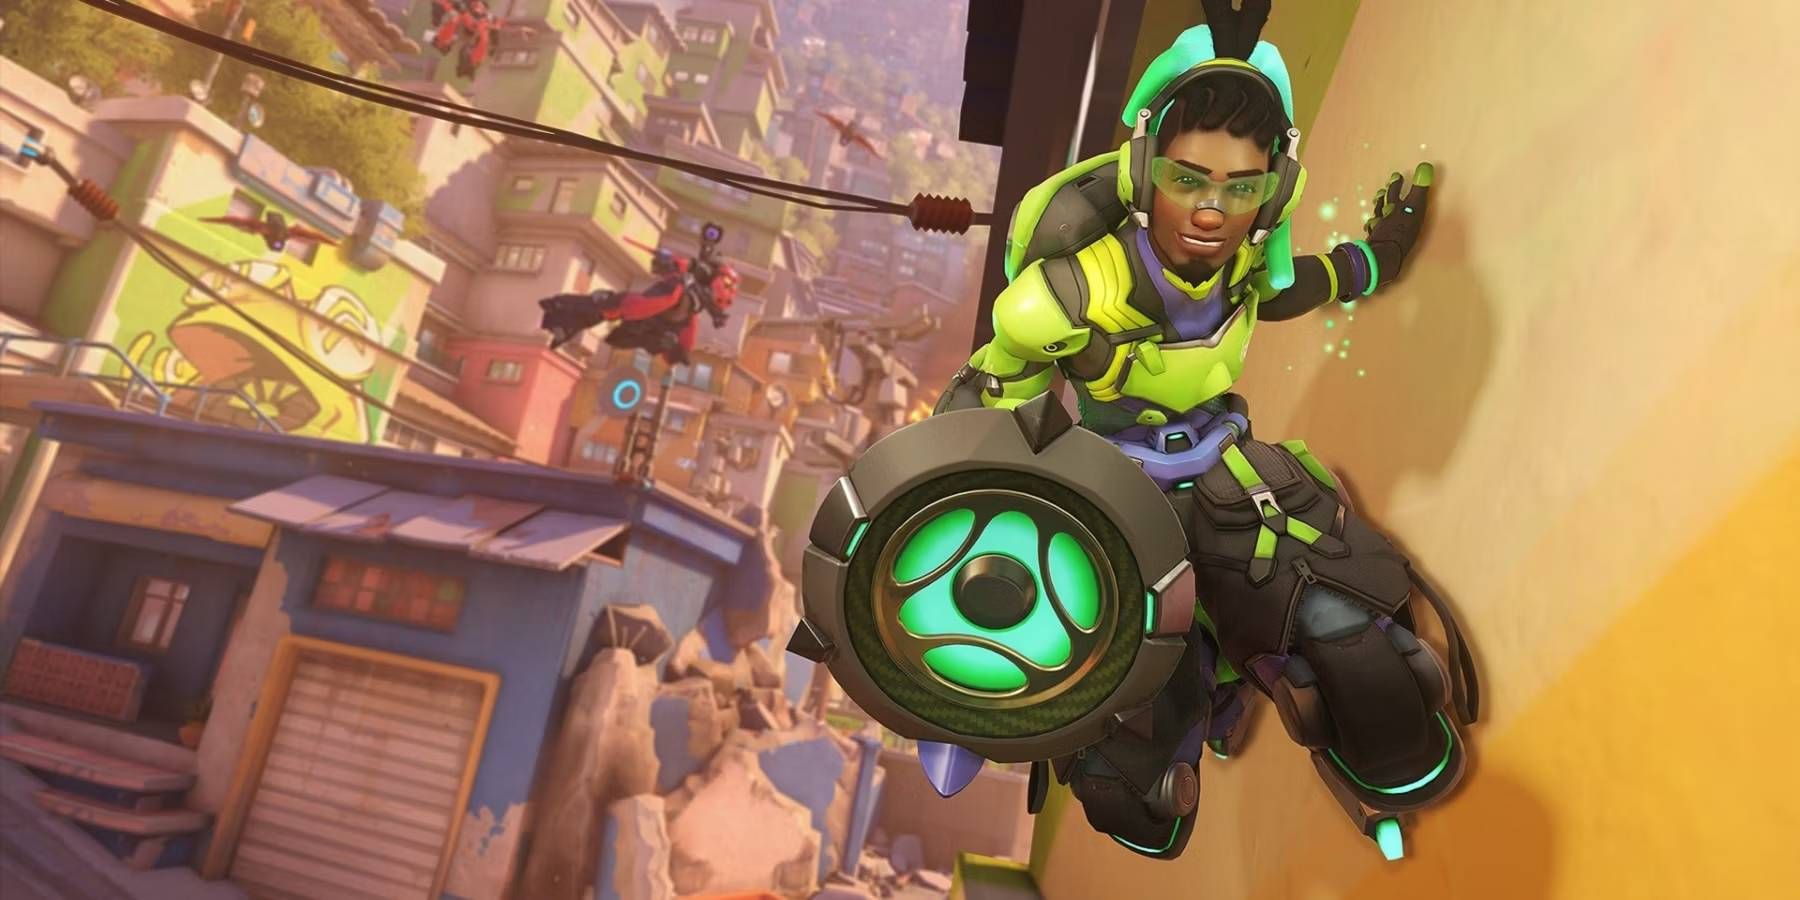 Overwatch 2 Lucio Using Wall Ride Ability Through Skates on Feet While Gun Points at Camera On Deathmatch Map 